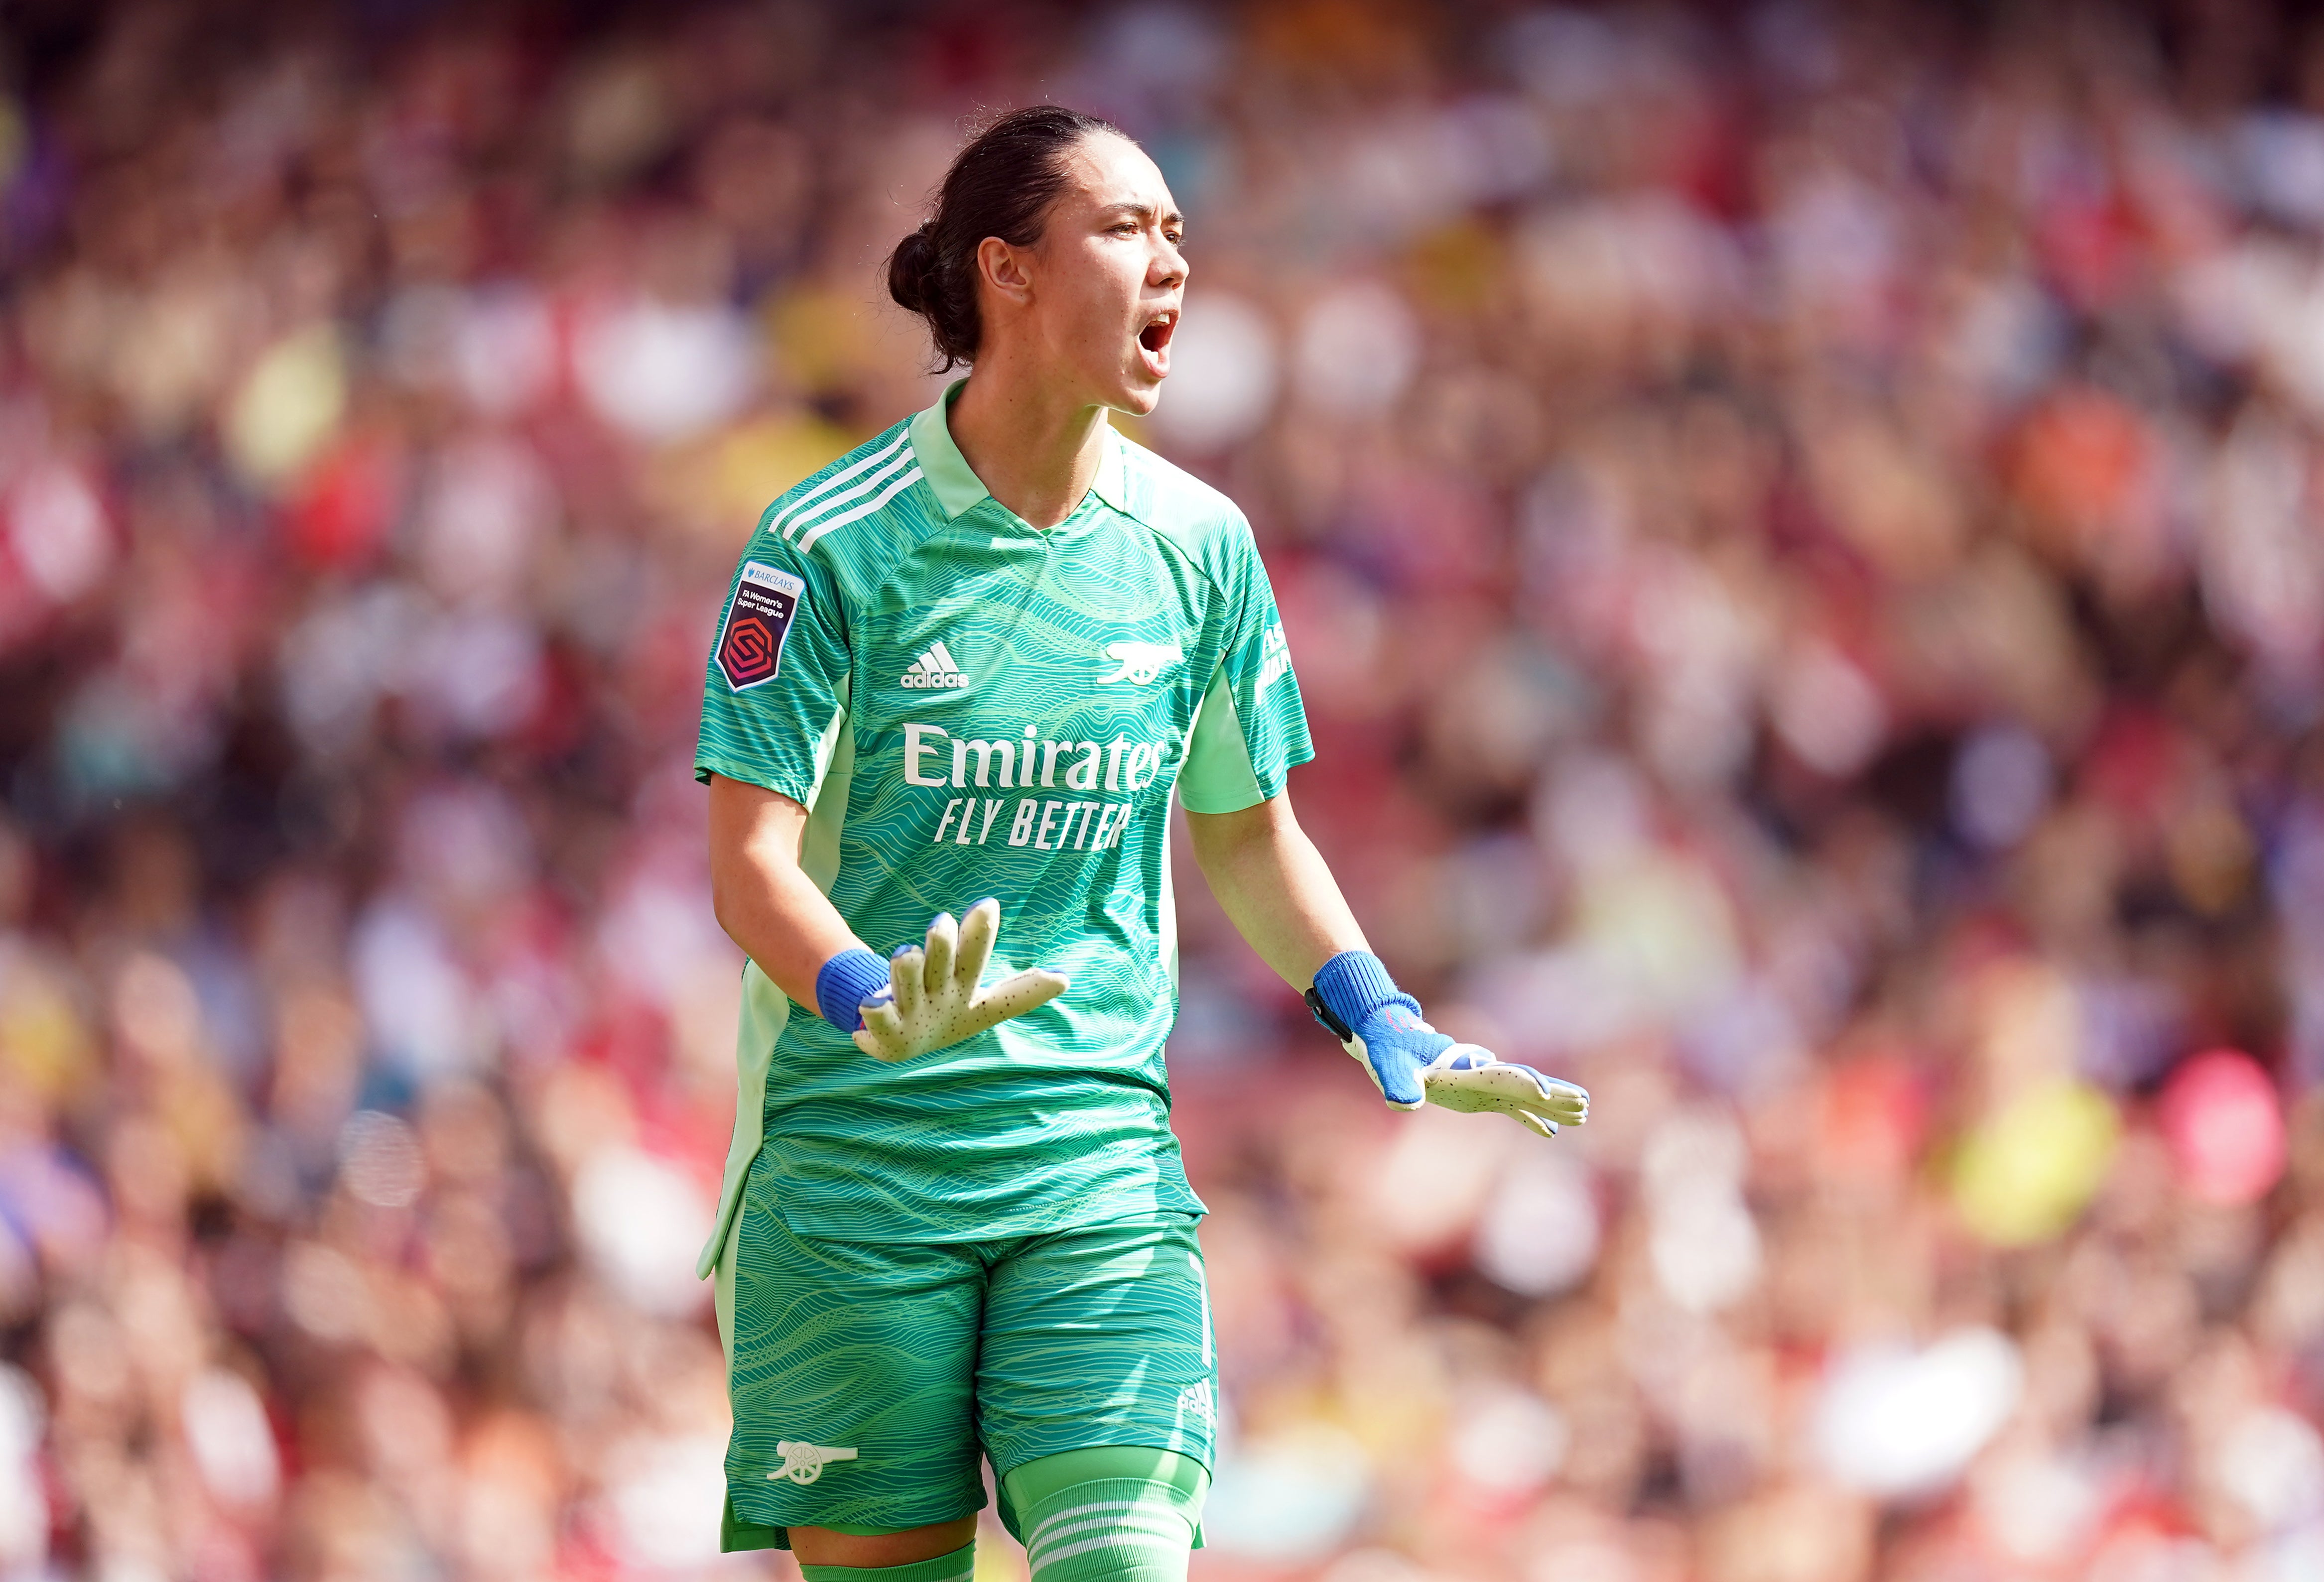 Goalkeeper Manuela Zinsberger during the Women’s Super League match against Chelsea at the Emirates Stadium (Mike Egerton/PA)